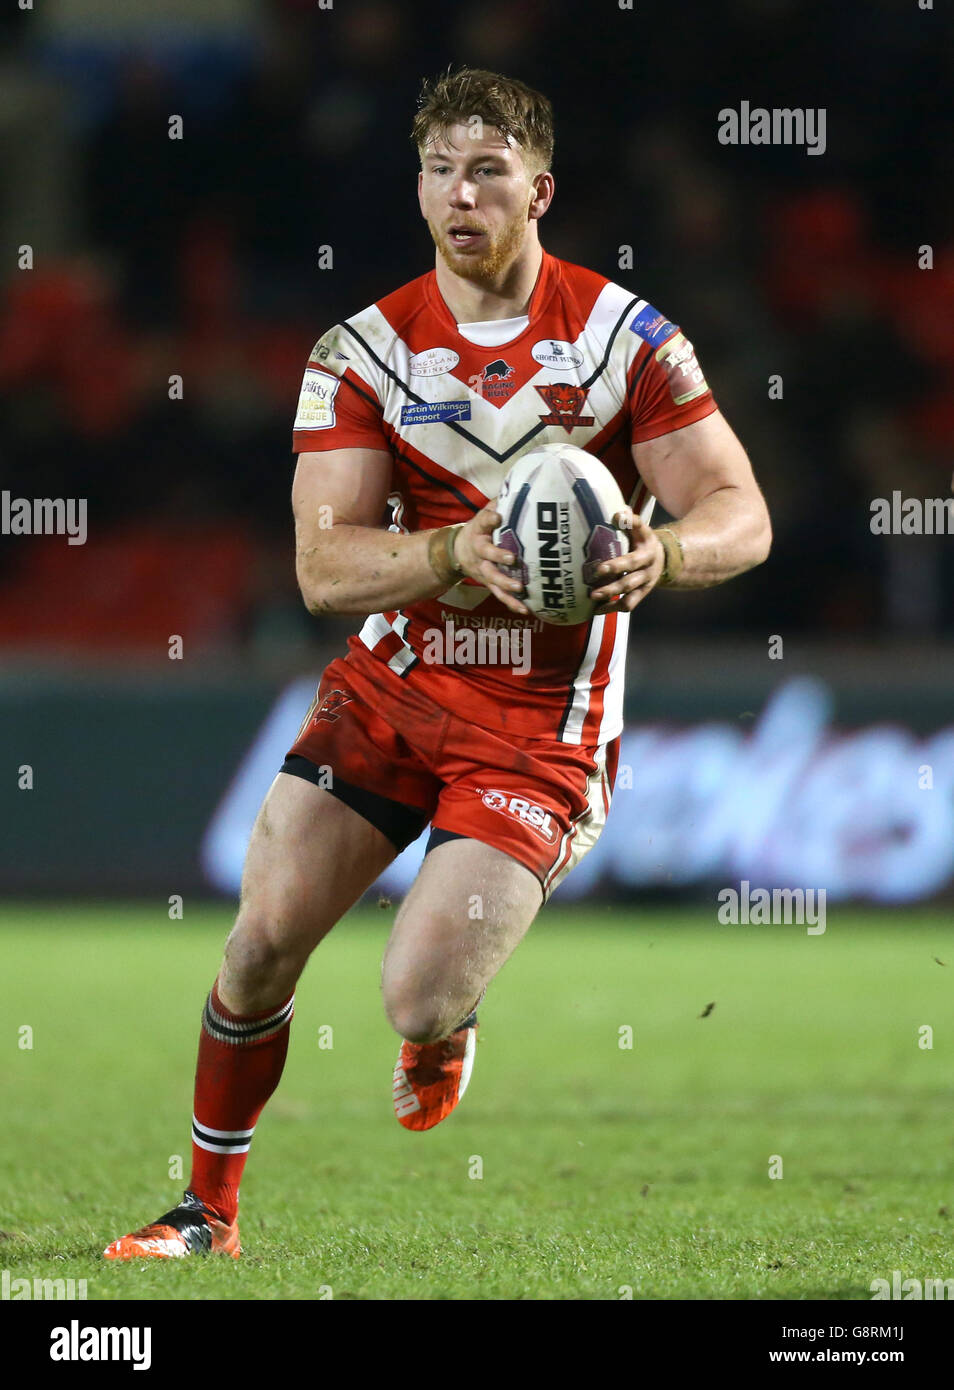 Salford Red Devils v St Helens - First Utility Super League - AJ Bell Stadium. Adam Walne, Salford Red Devils Stock Photo